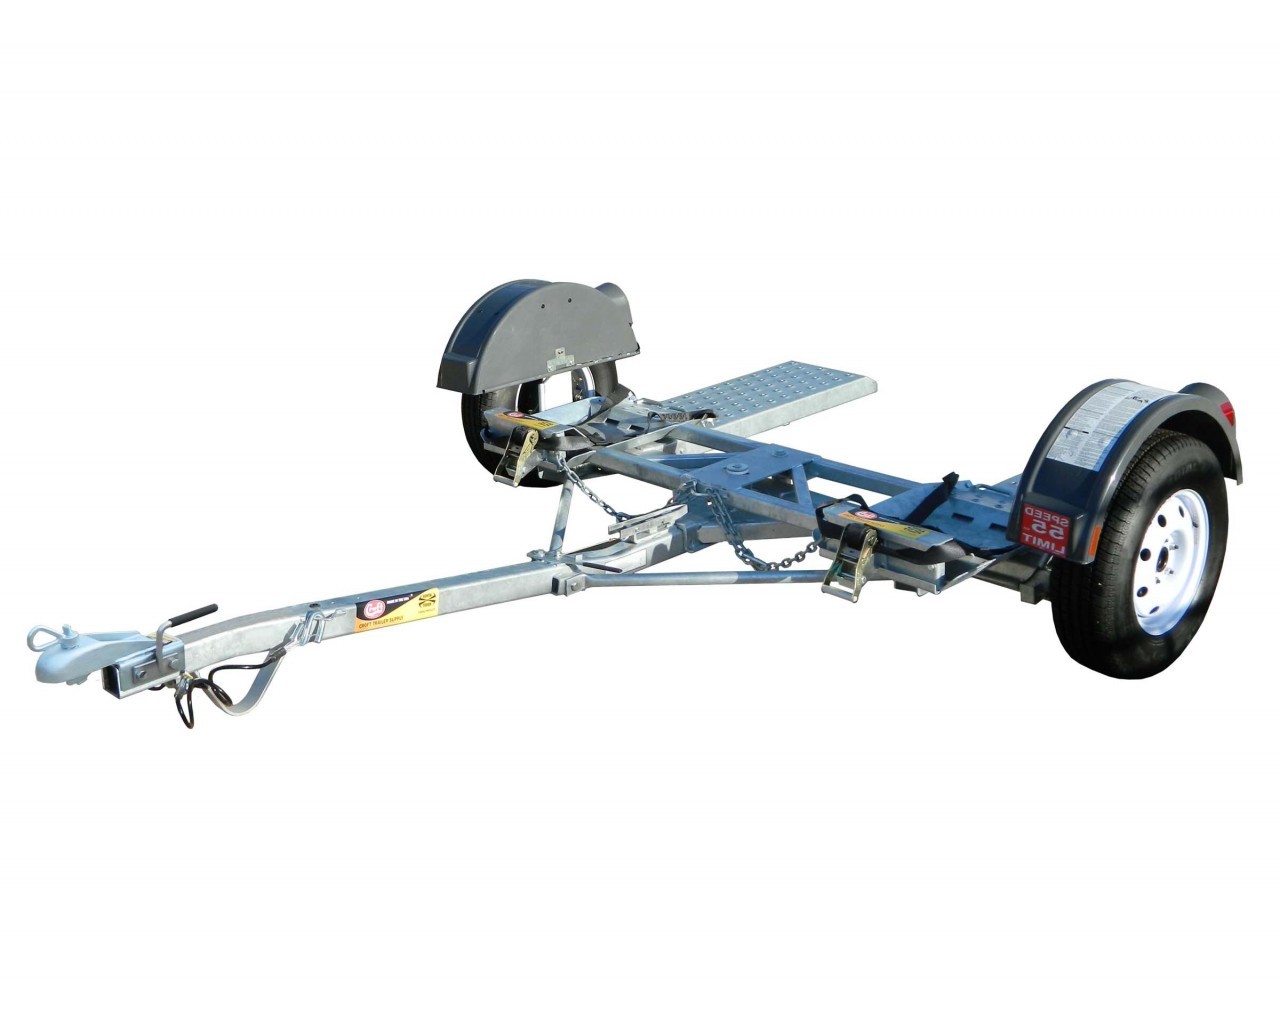 Tow dolly rental